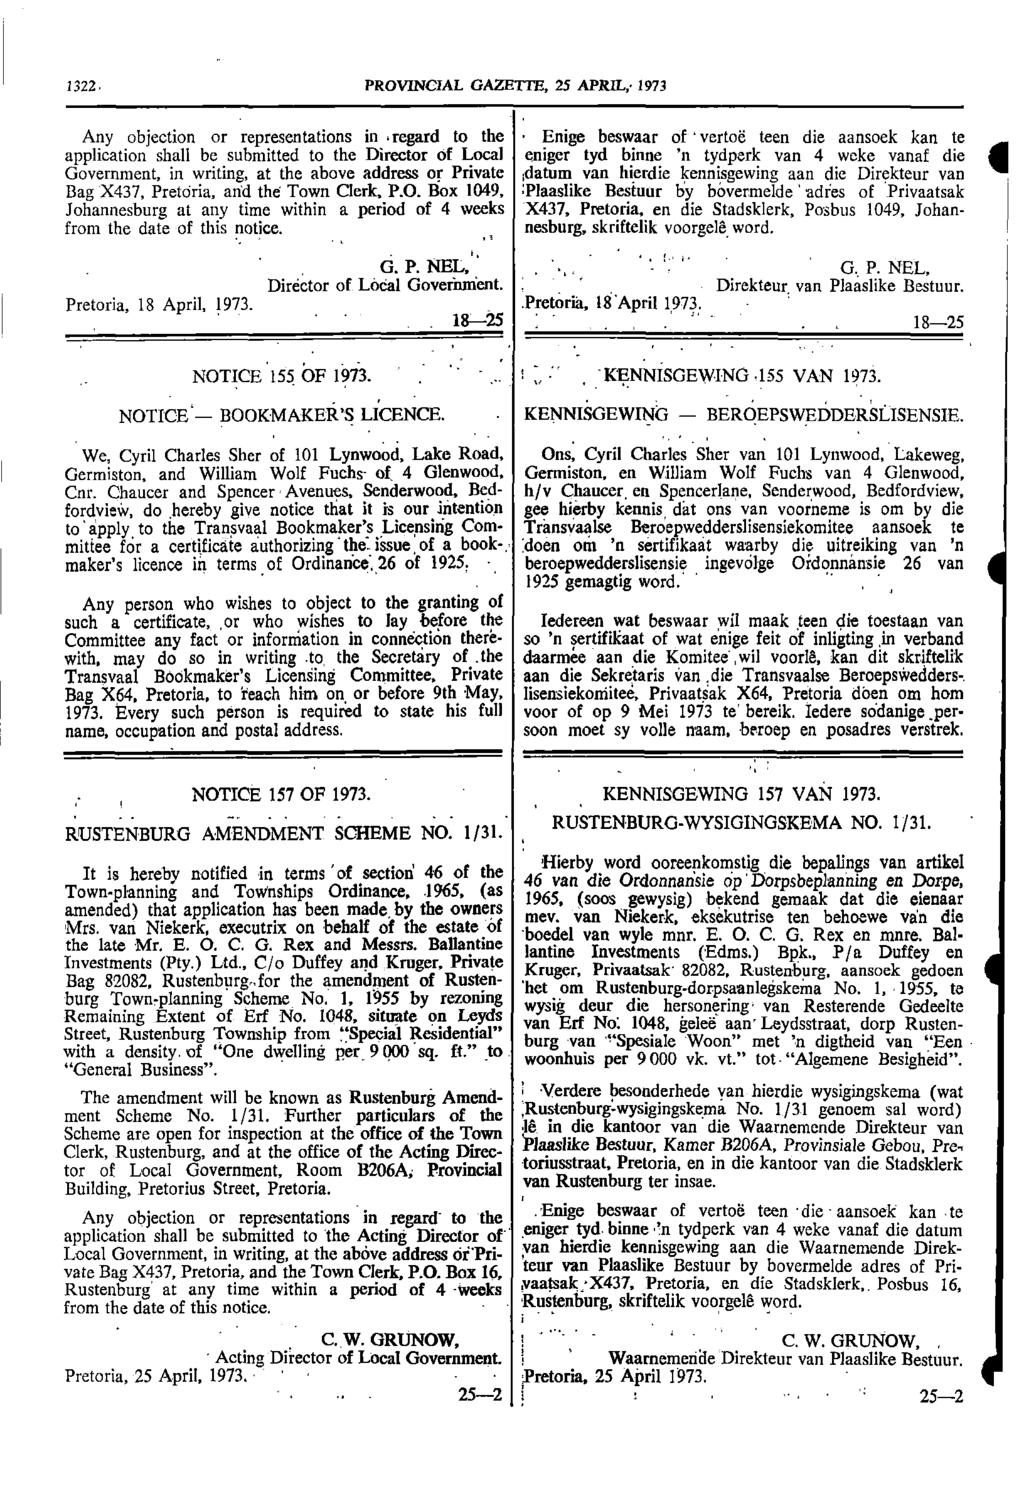 1322 PROVINCIAL GAZETTE 25 APRIL 1973 Any objection or representations in regard to the Enige beswaar of vertod teen die aansoek kan te application shall be submitted to the Director of I fled eniger